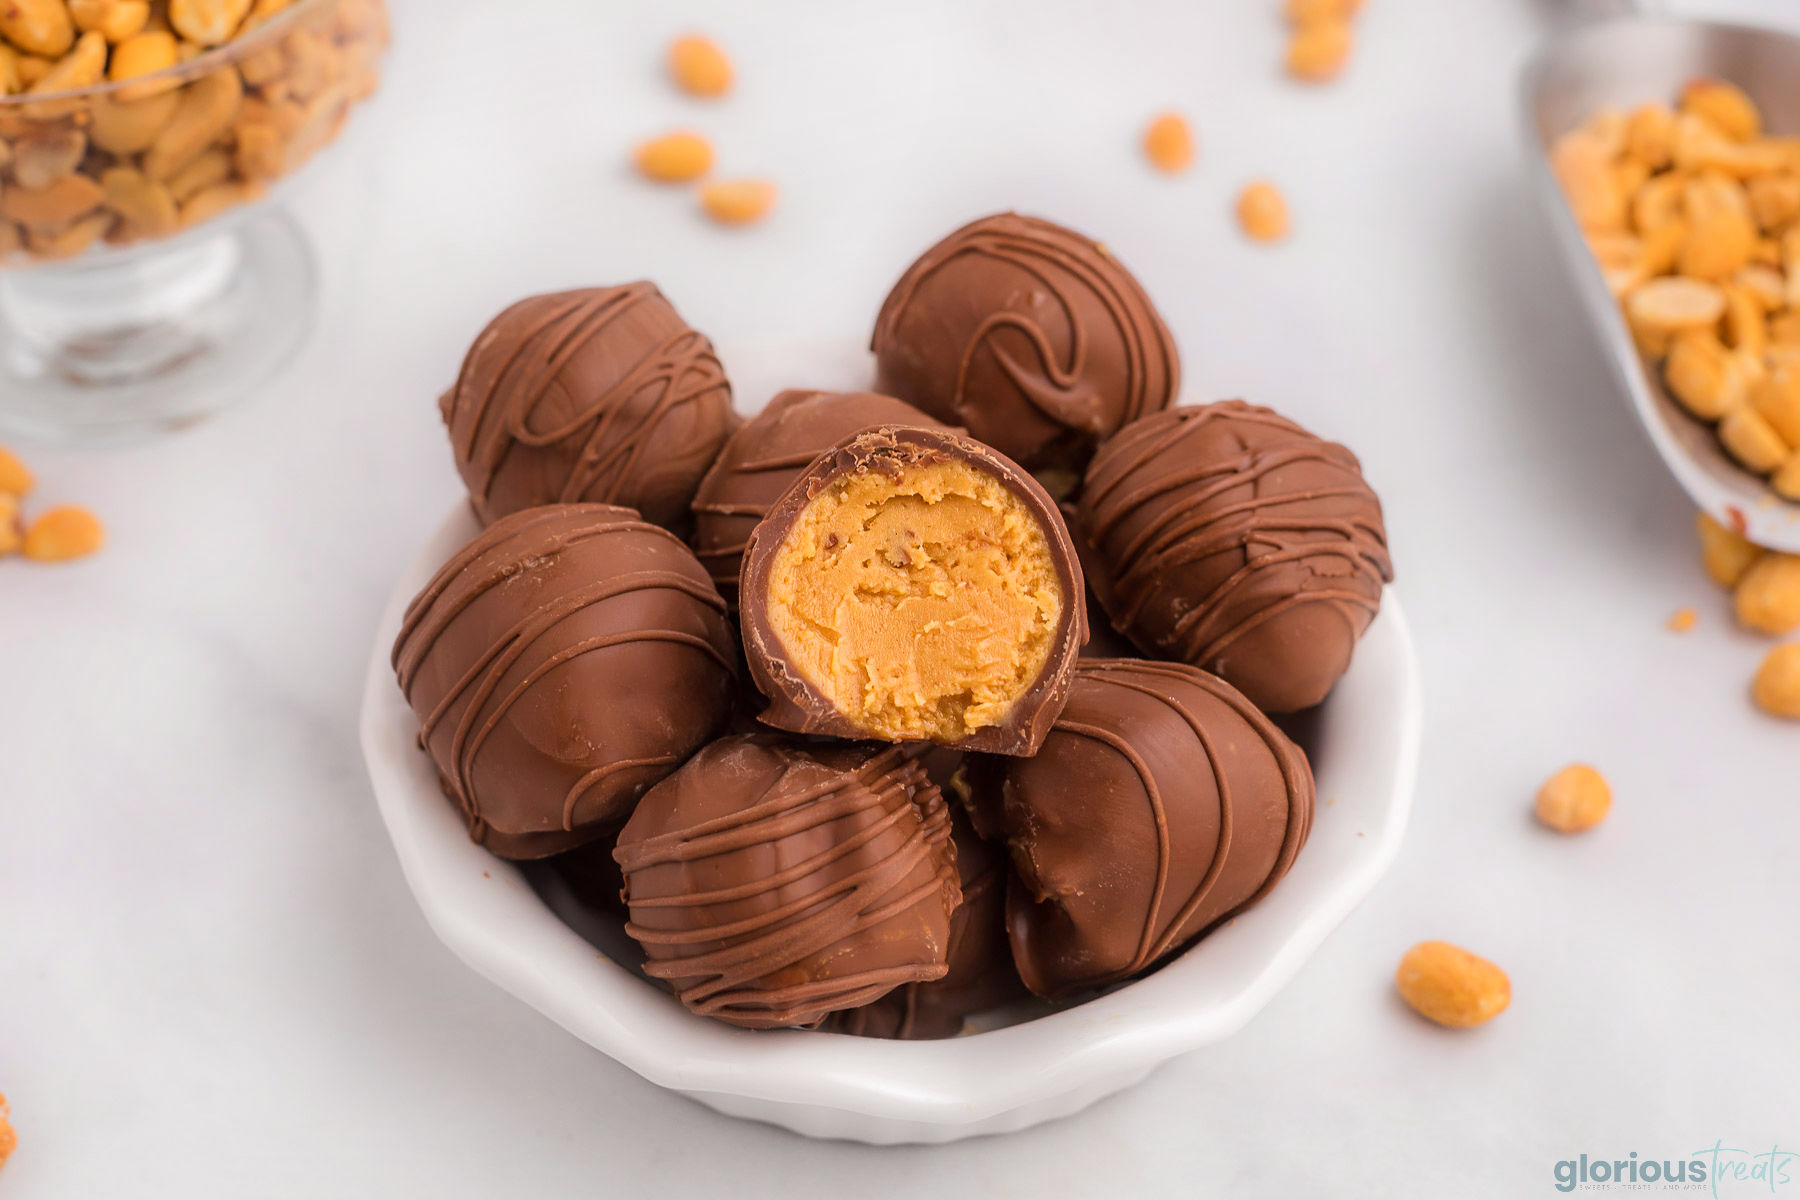 wide shot of a small, white bowl with scalloped edges loaded to overflowing with homemade peanut butter balls recipe. top ball has a bite taken out of it. peanuts are scattered around the bowl on the white surface it is sitting on.